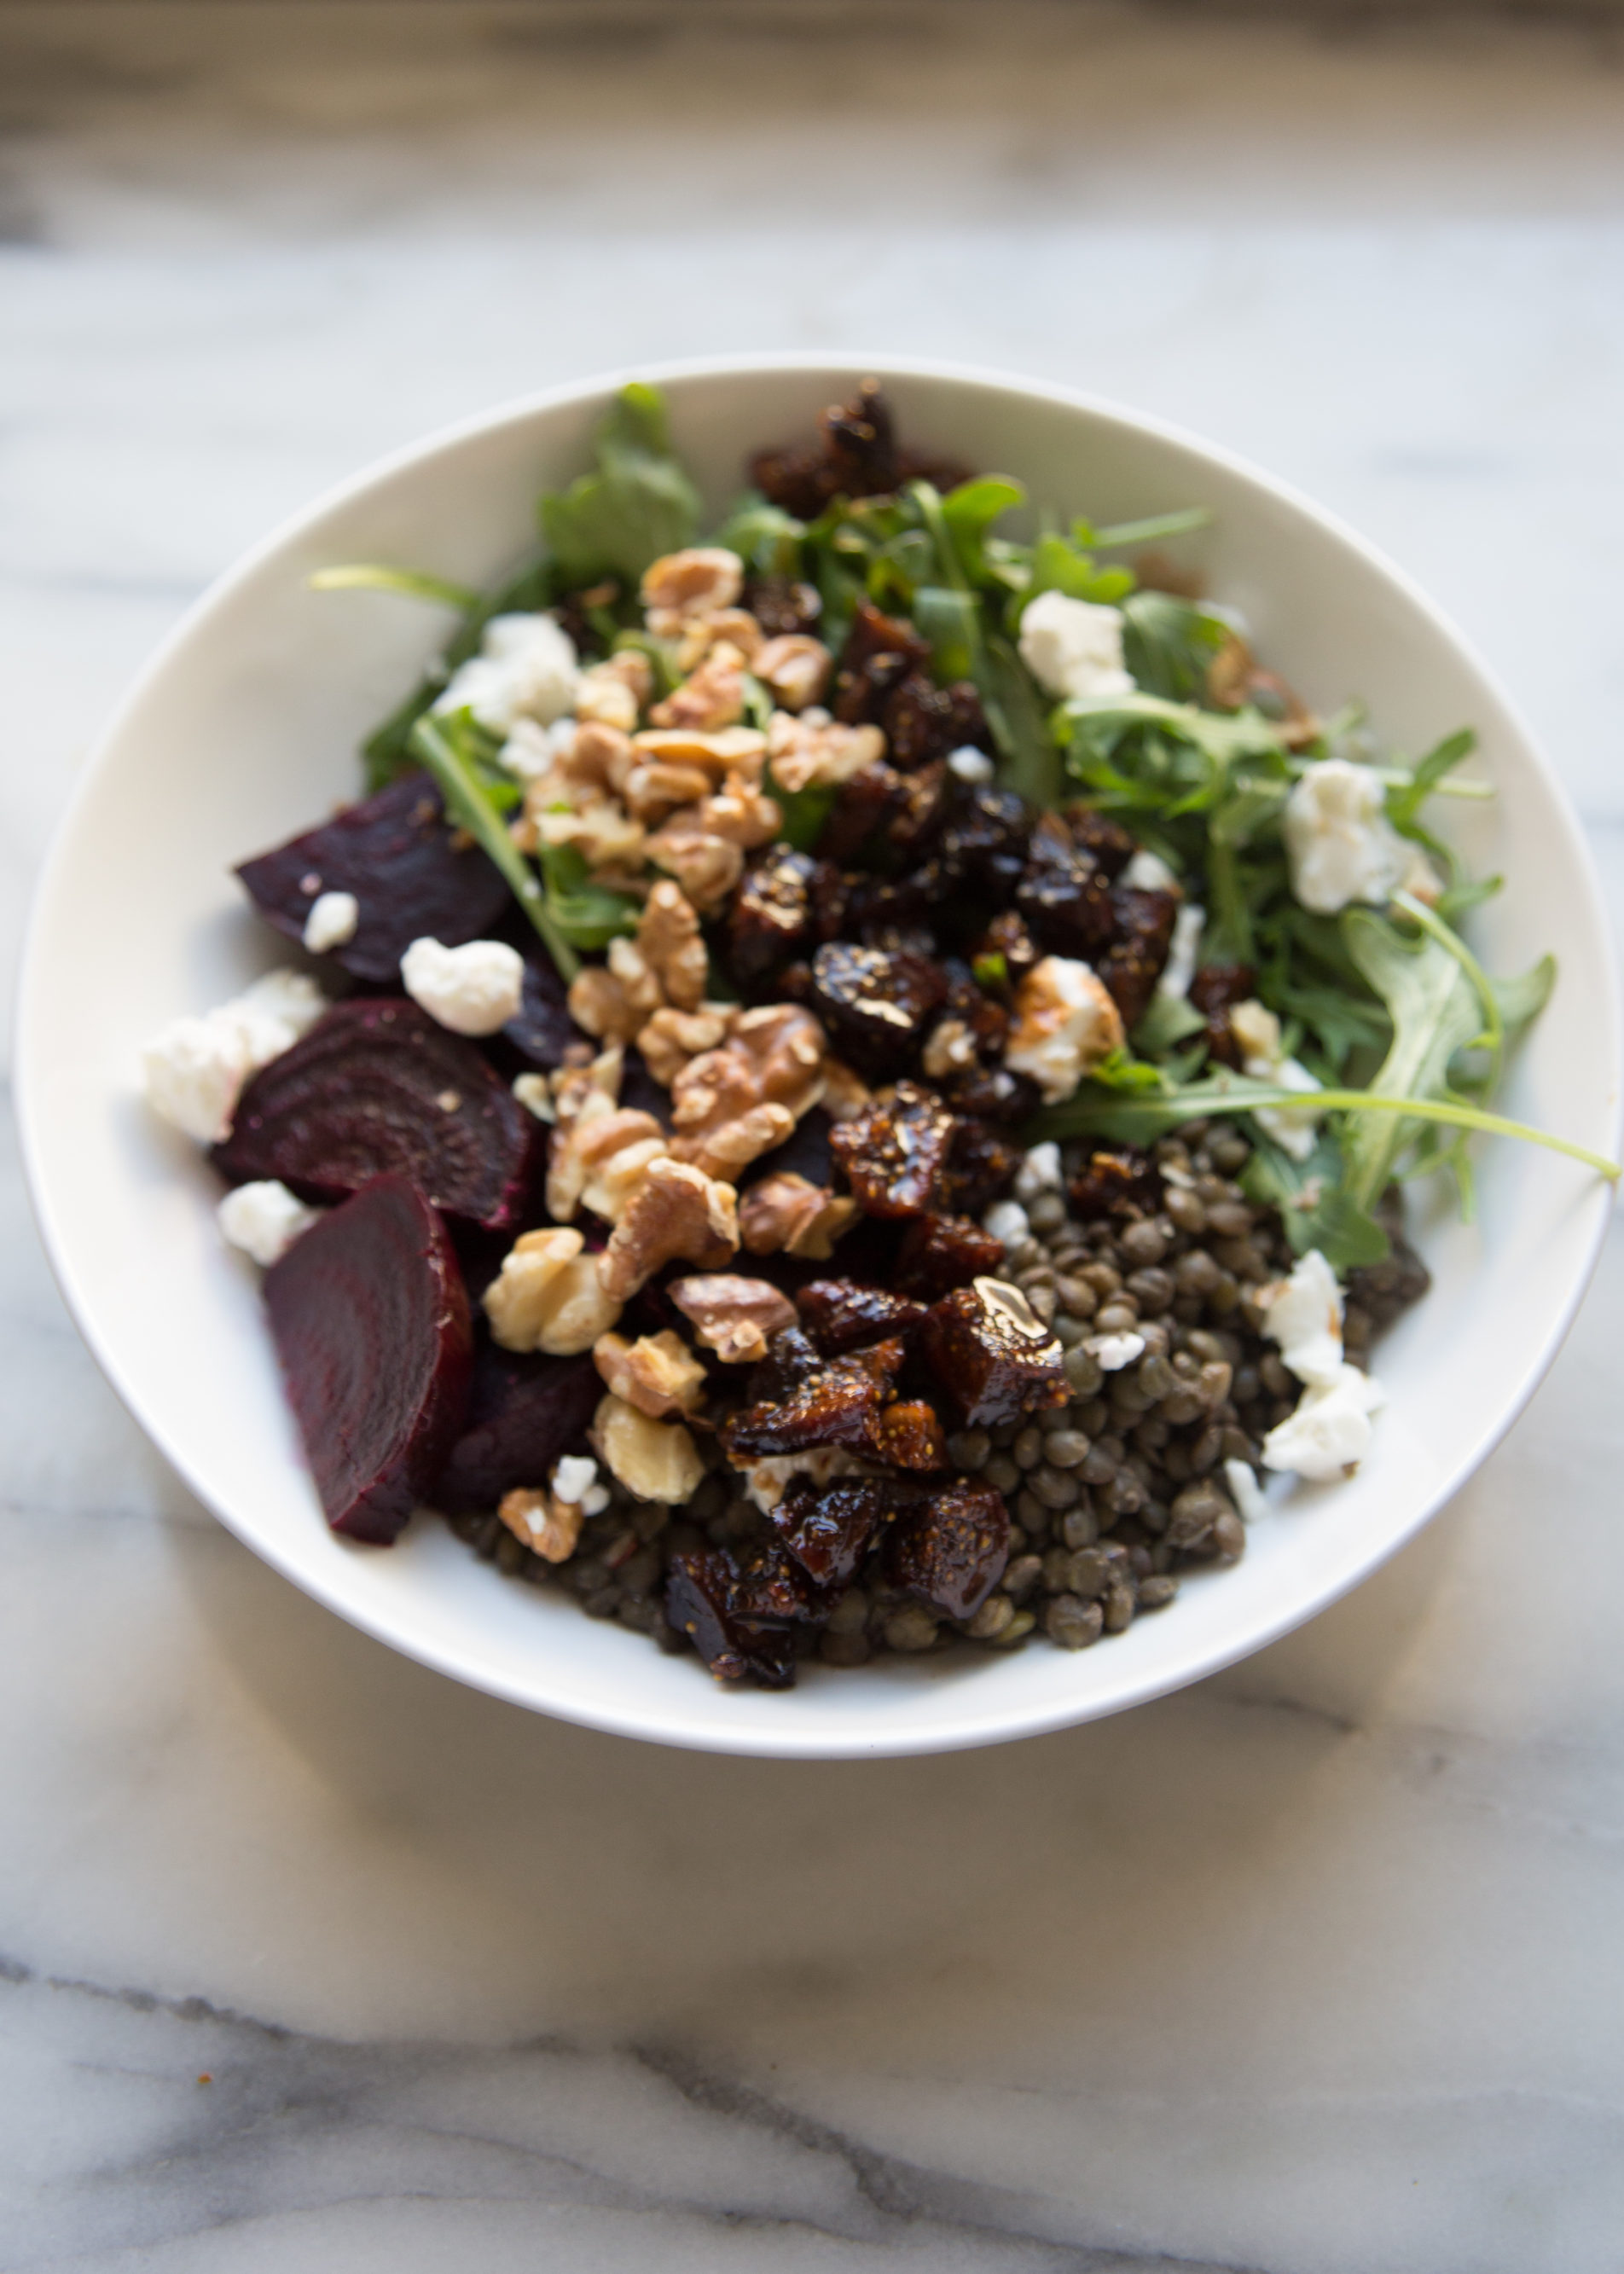 Warm Lentil Salad with Beets + Balsamic Figs - Valley Fig Growers